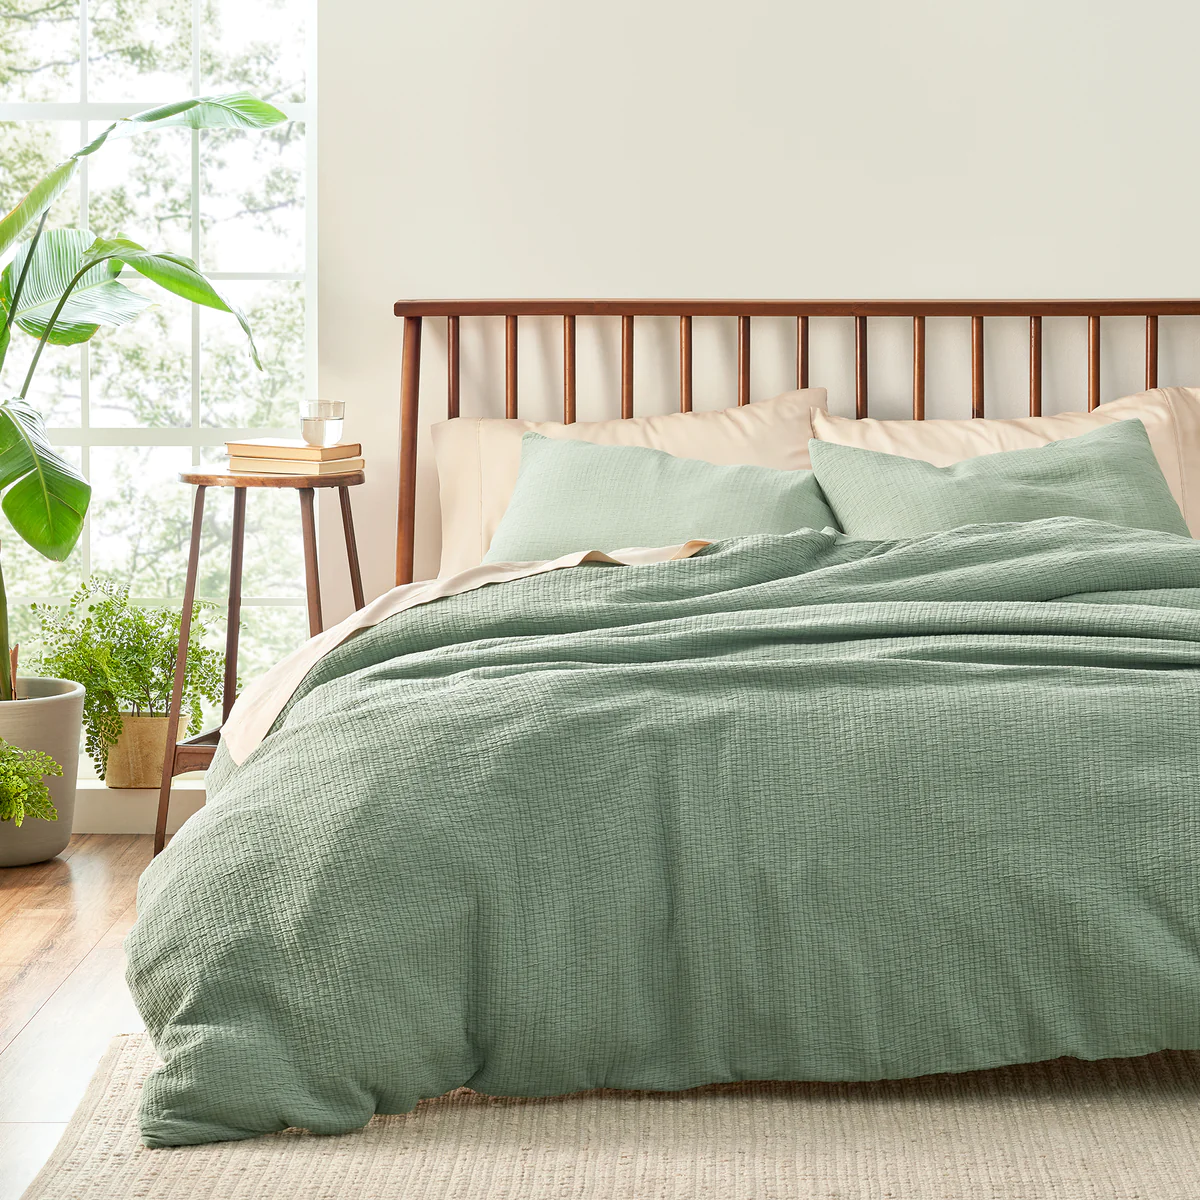 The Most Important Green Certifications for Bed Sheets - LeafScore